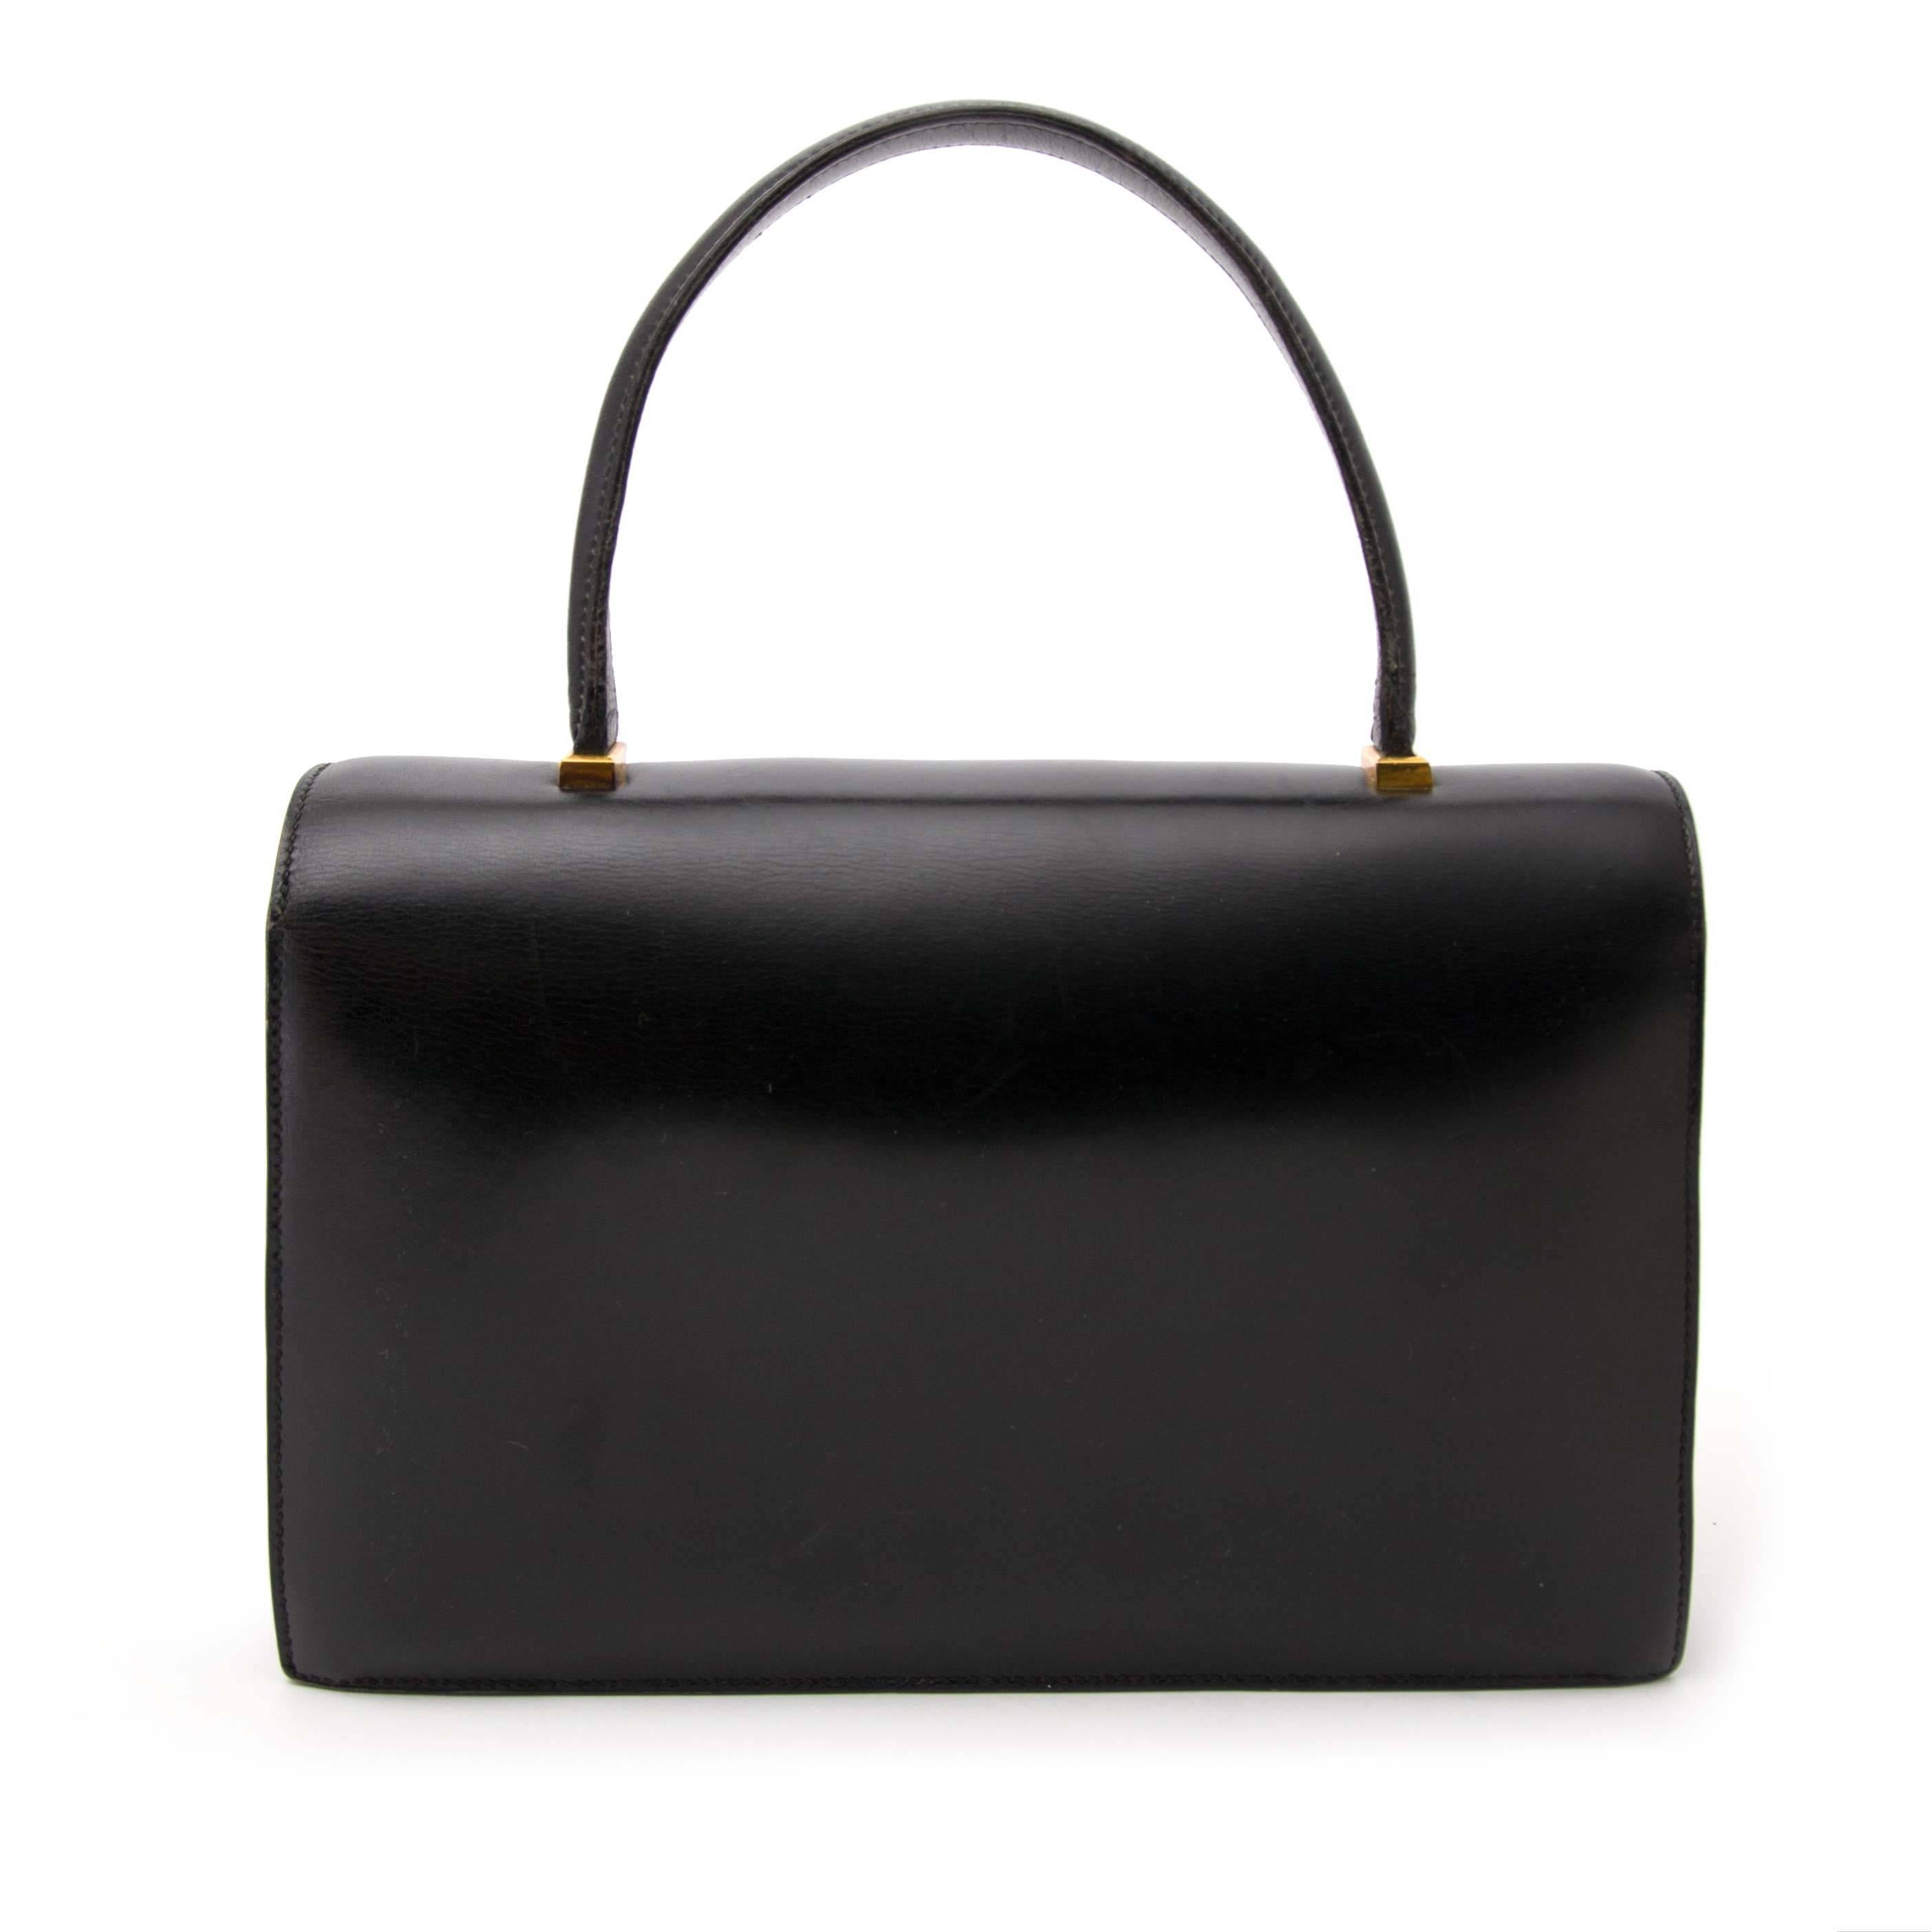 In very good condition.

Hermès Black Piano Bag

This beautiful Hermès bag comes in a timeless black color with gold toned hardware.

The interior is made out of two large compartments and one small compartment. The bag has three side pockets.

 